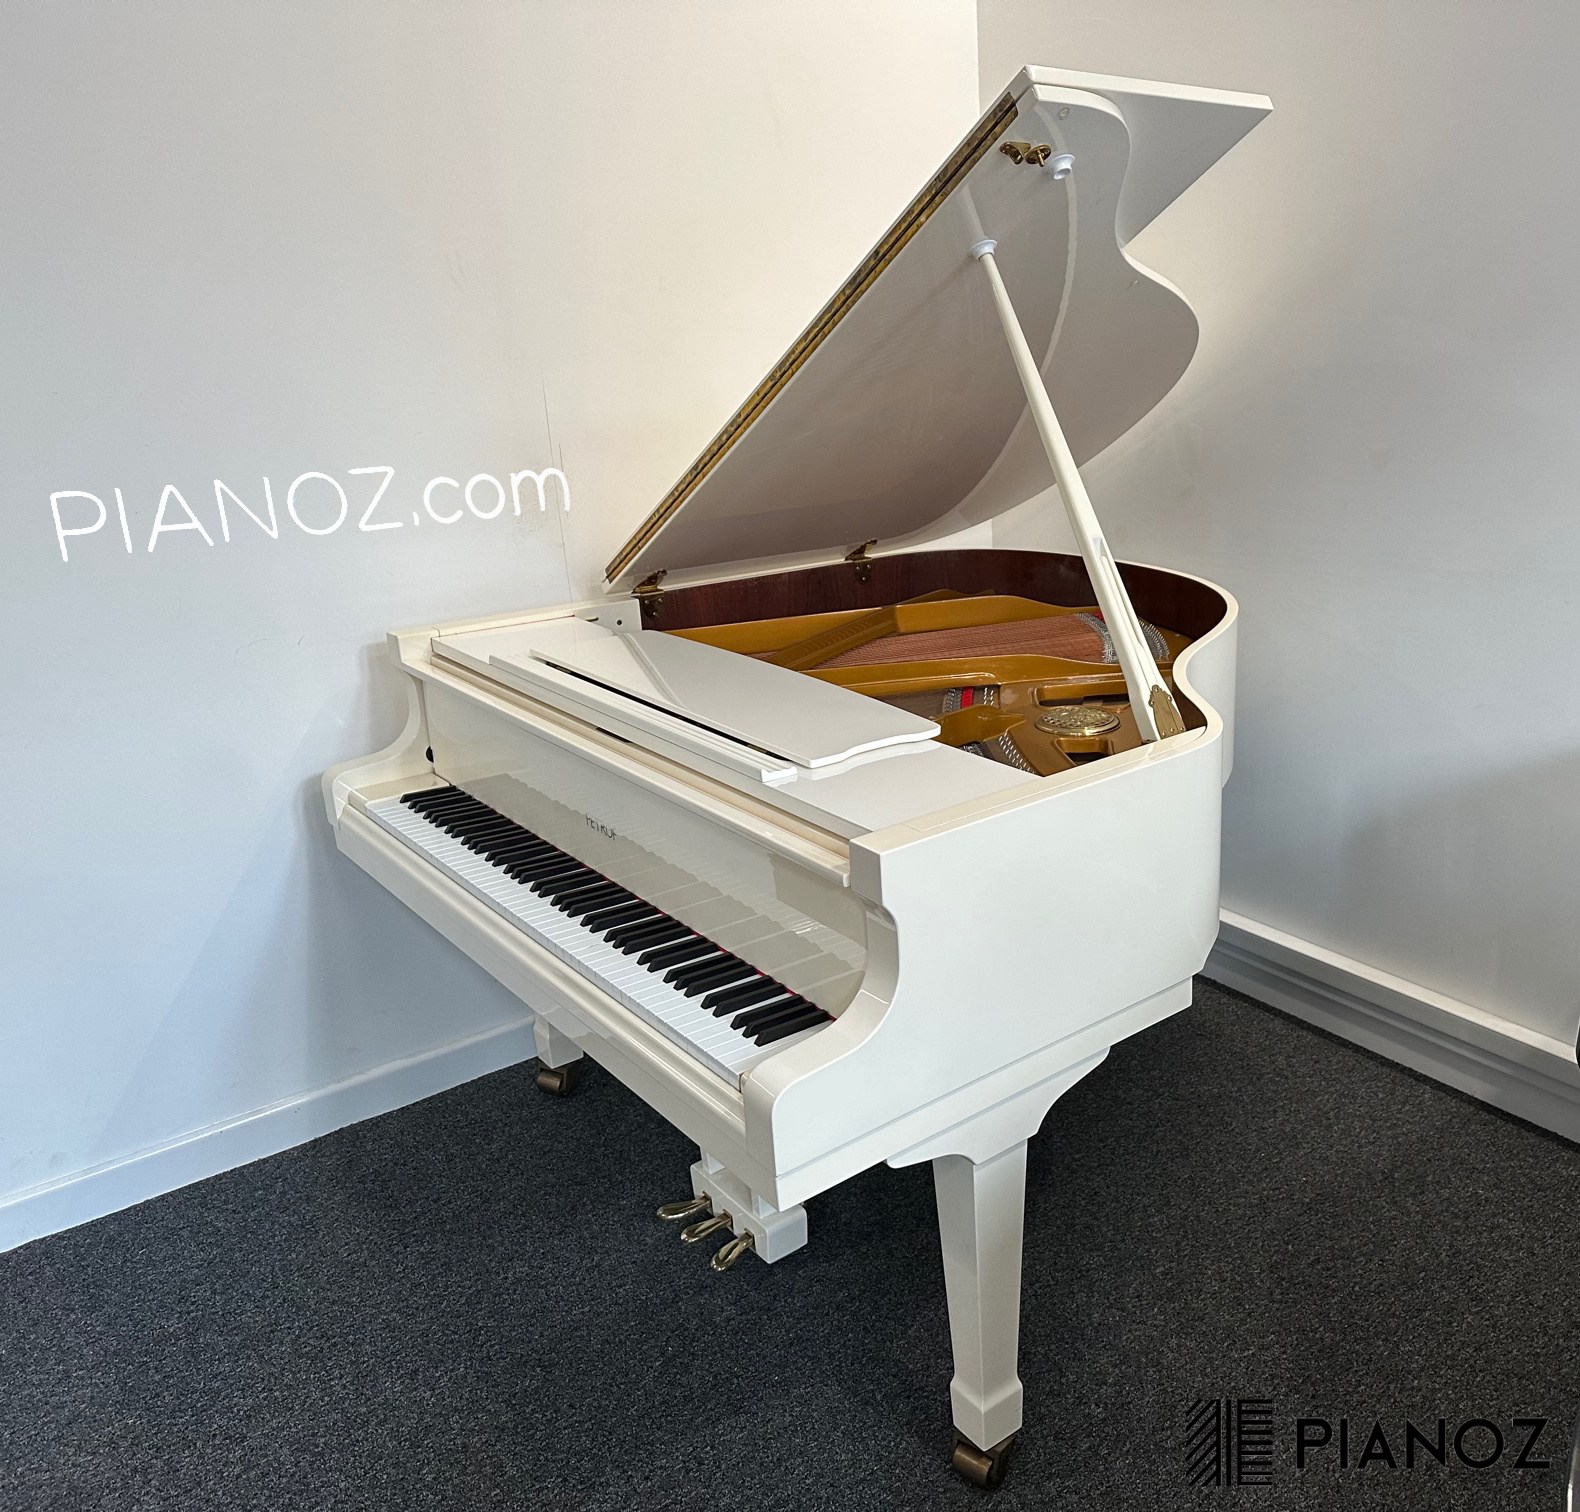 Petrof White Baby Grand Piano piano for sale in UK